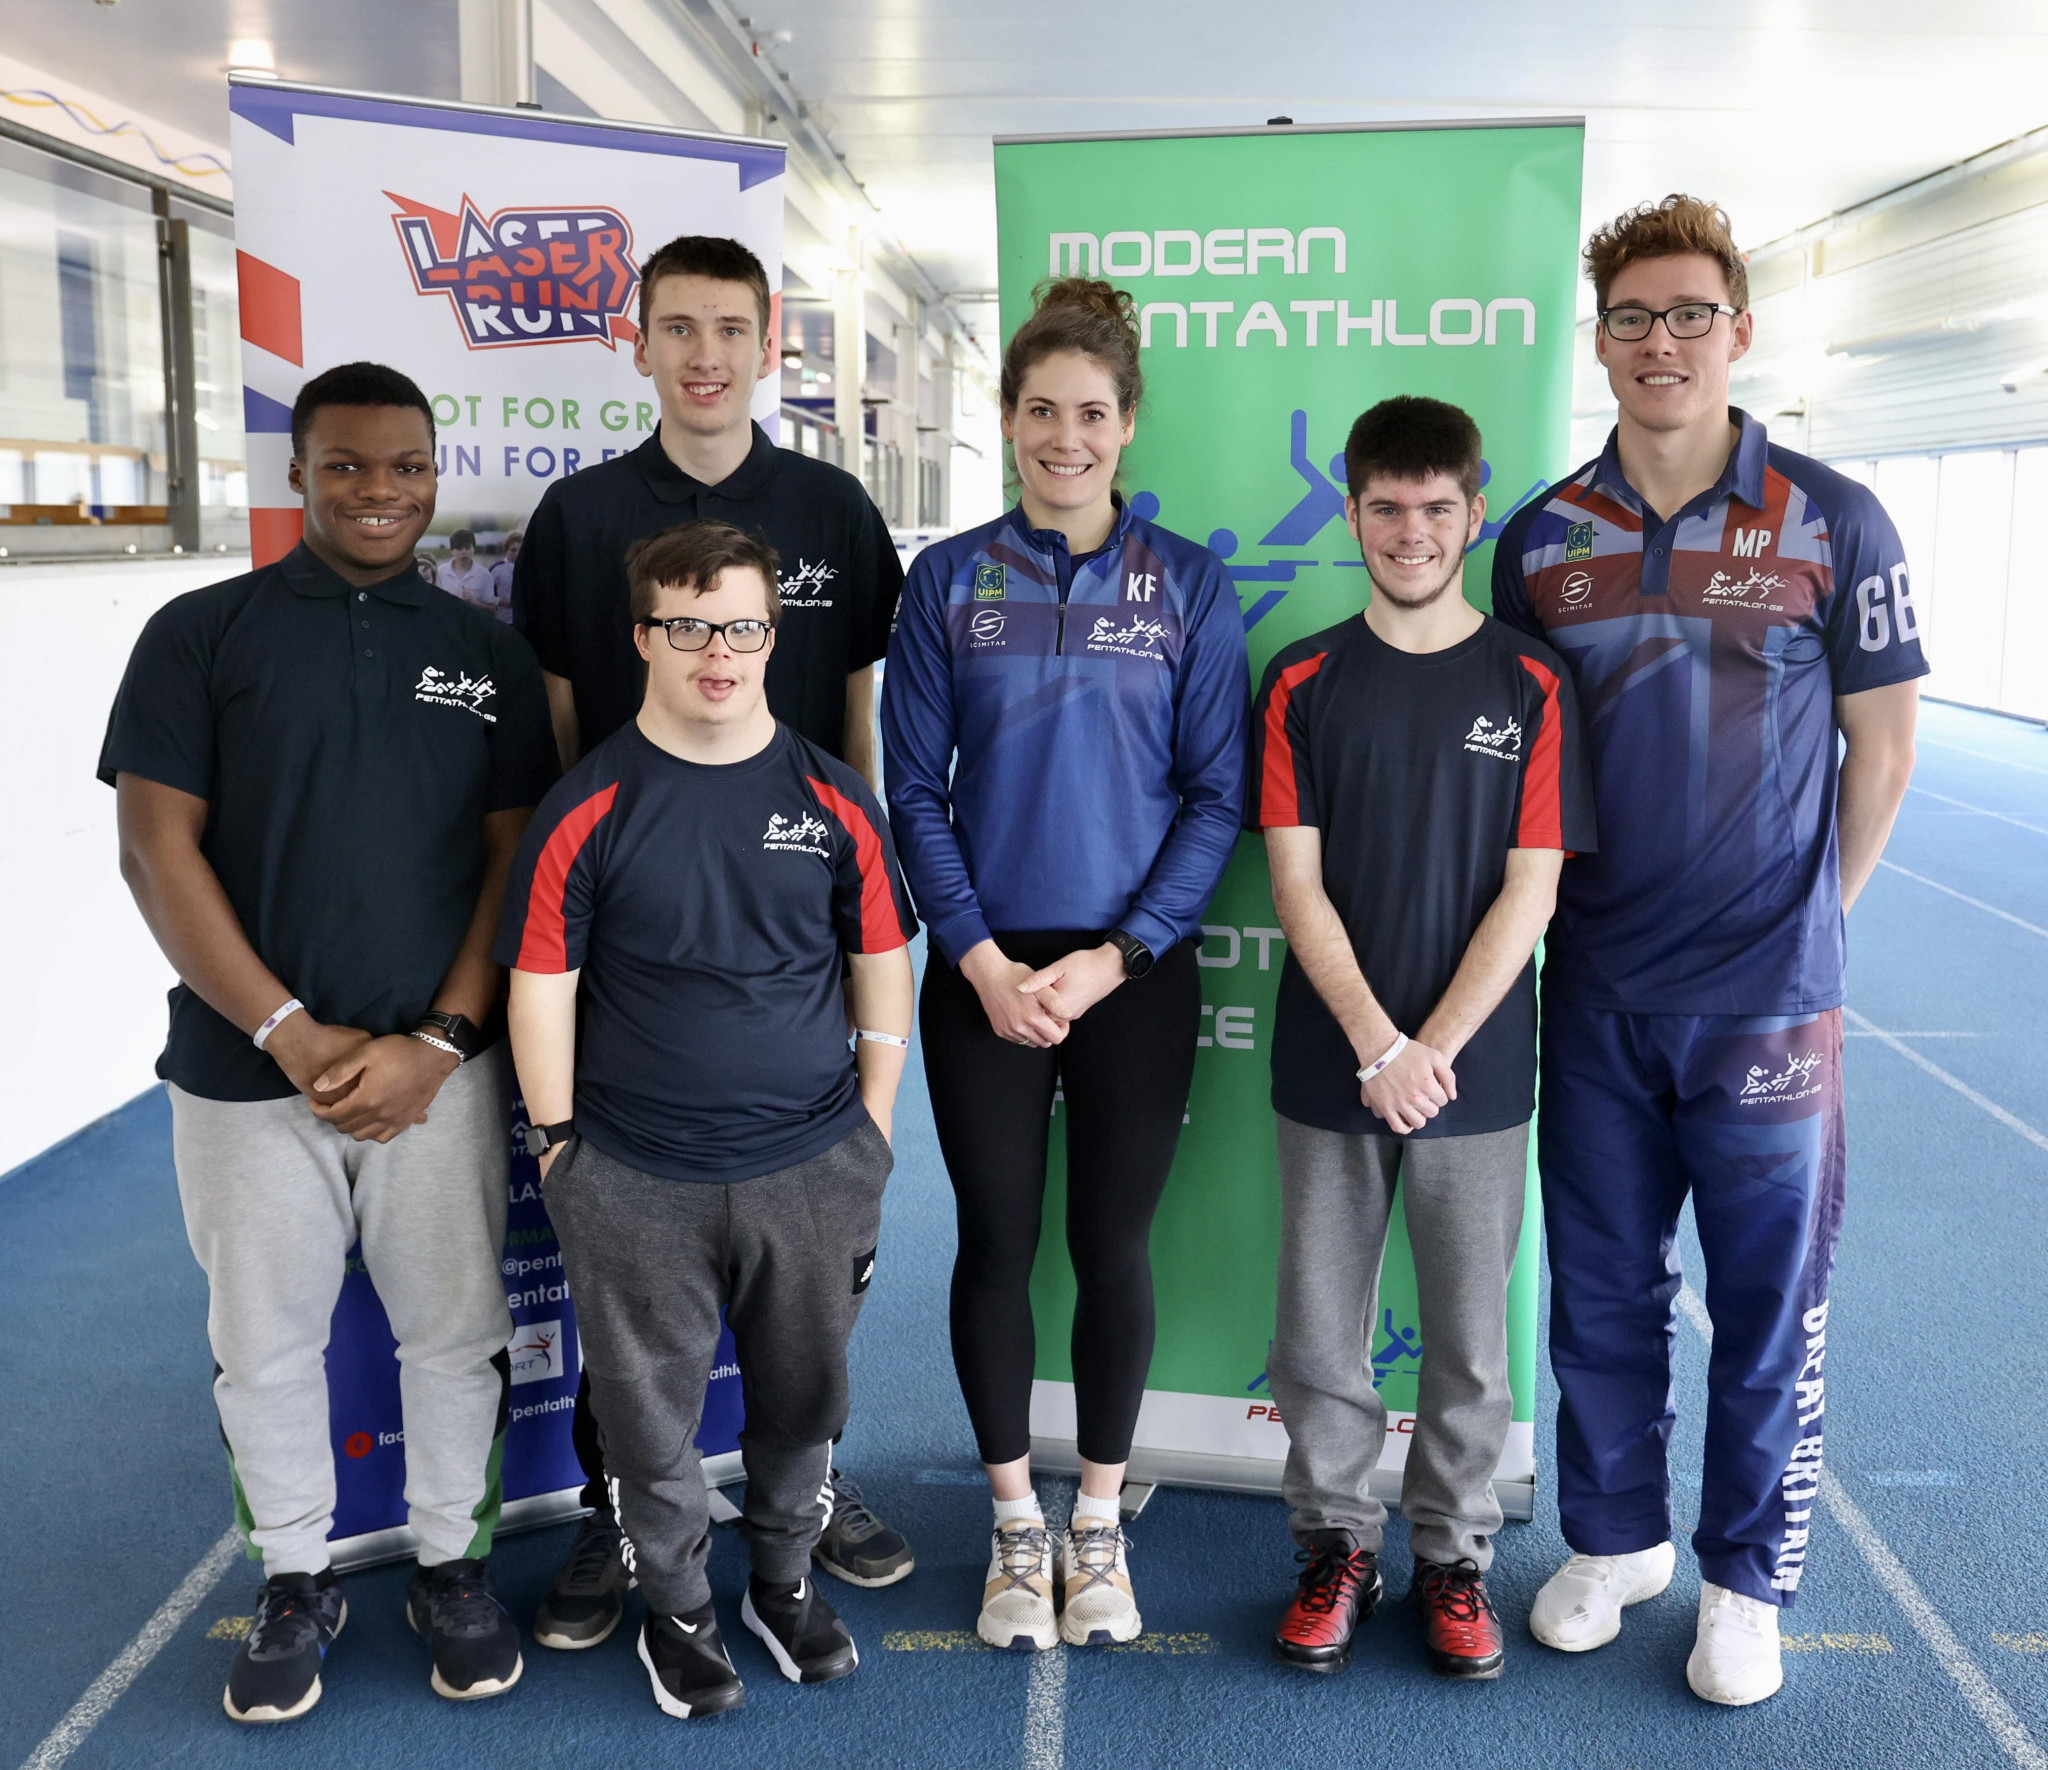 Pupils from Warmley Park in Bristol joined British modern penathlon stars Kate French and Myles Pillage at the University of Bath which is due to stage this year's Modern Pentathlon and Laser Run World Championships ©Anna Barclay/Pentathlon GB